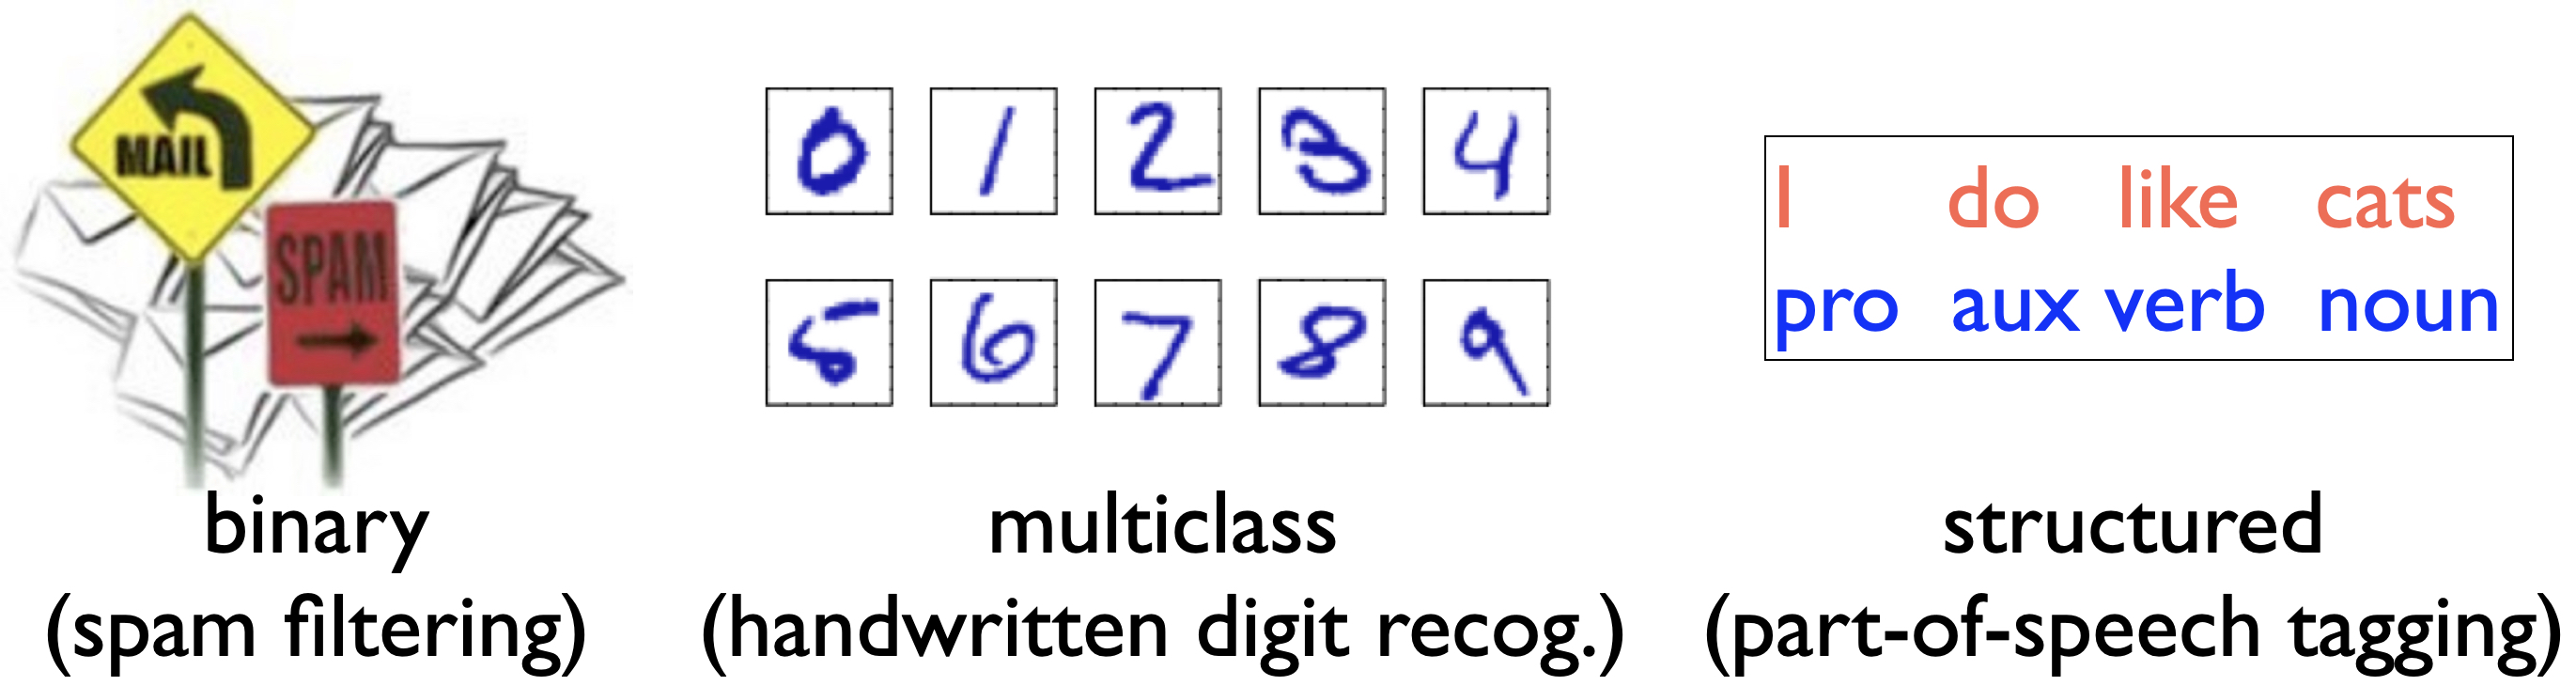 classification examples: binary, multiclass, and structured classification